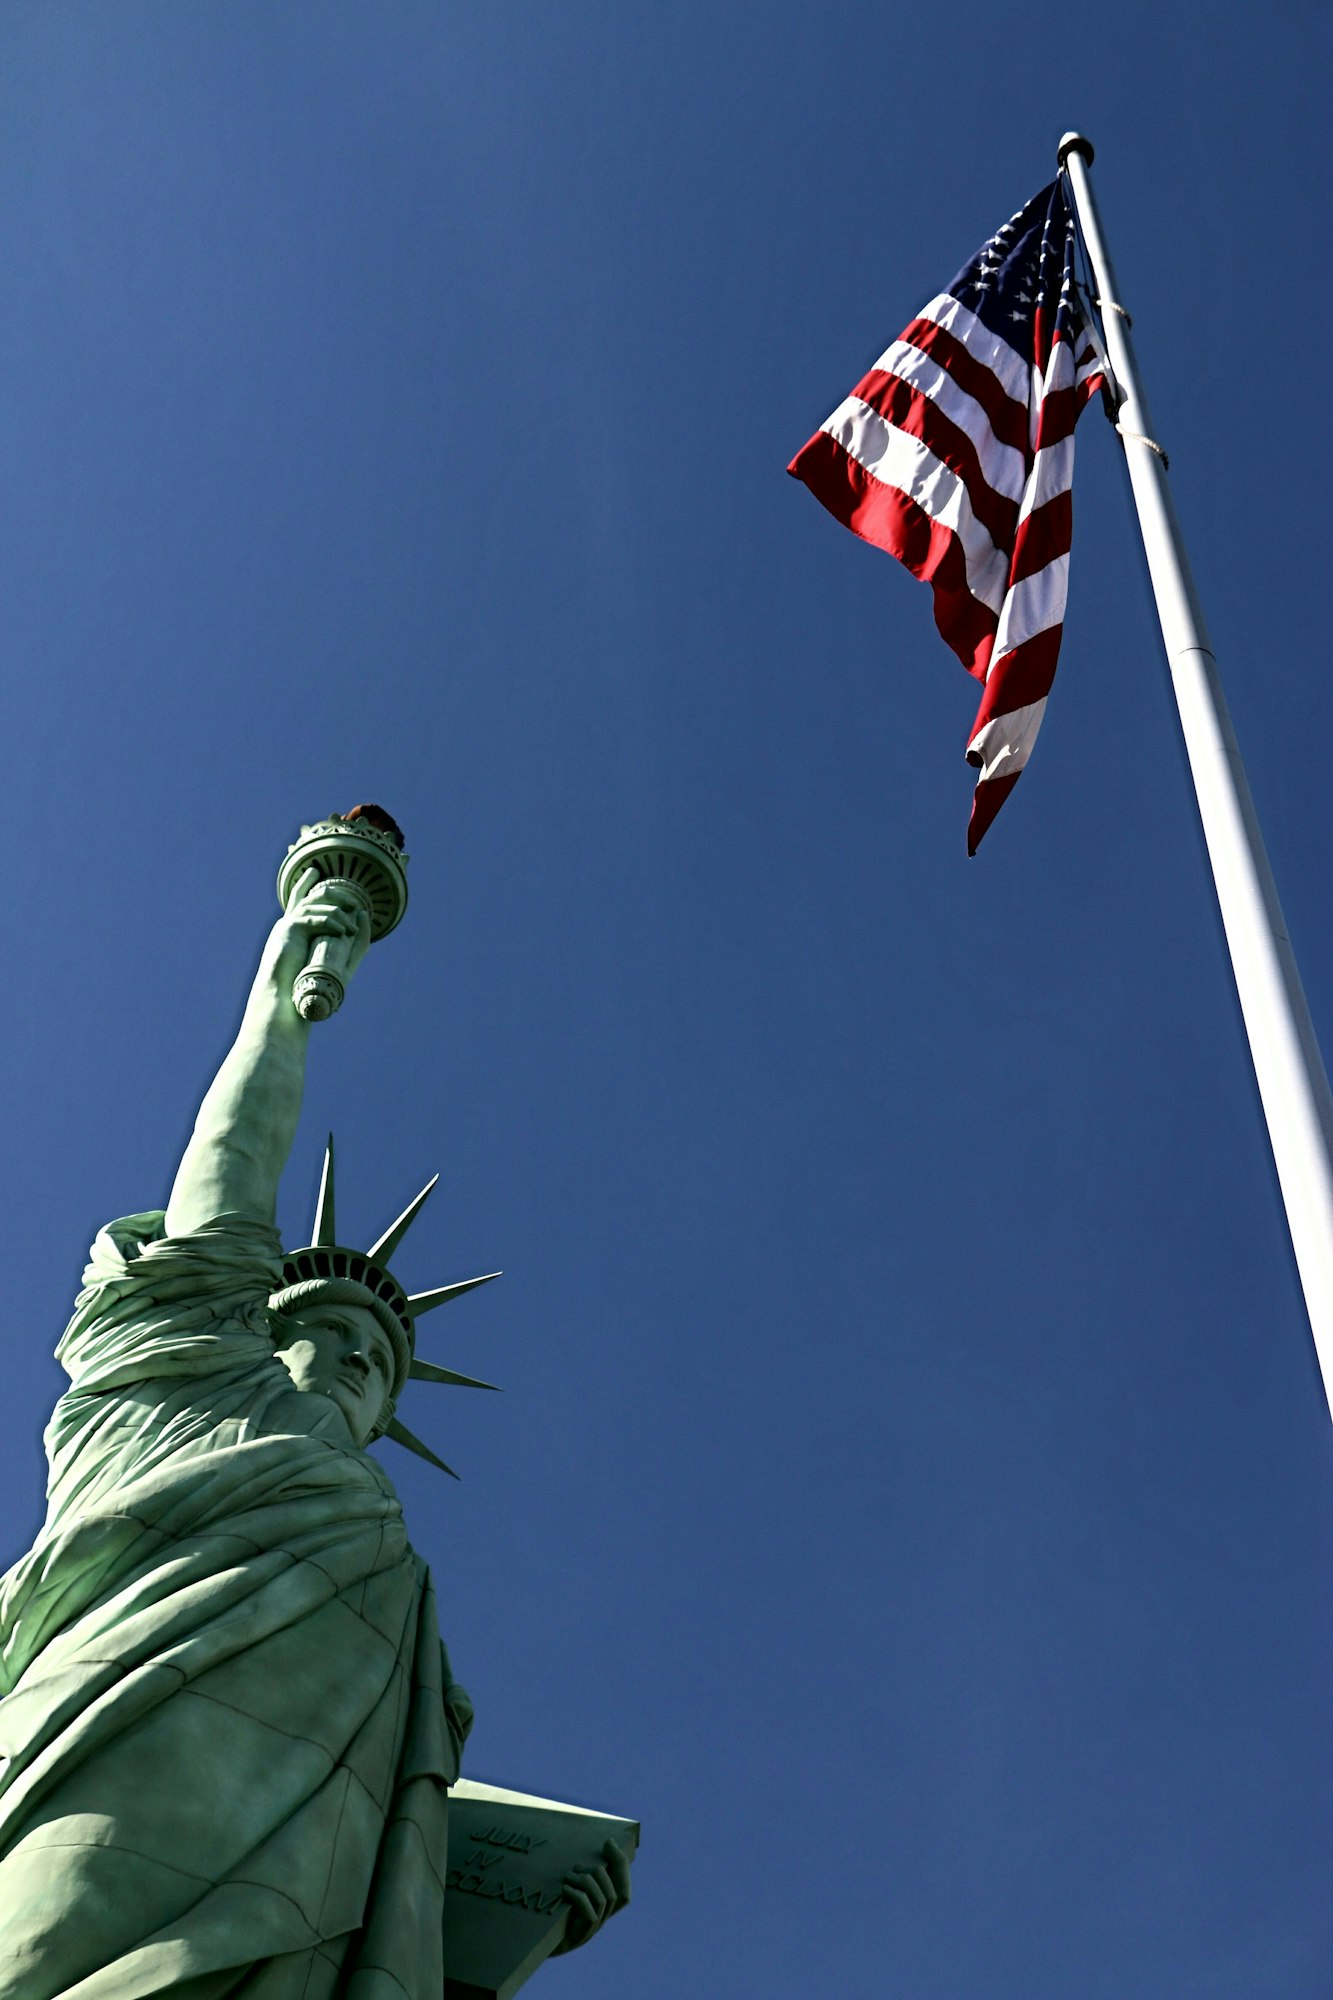 Vertical image of the Statue of Liberty and an American flag against a clear blue sky.